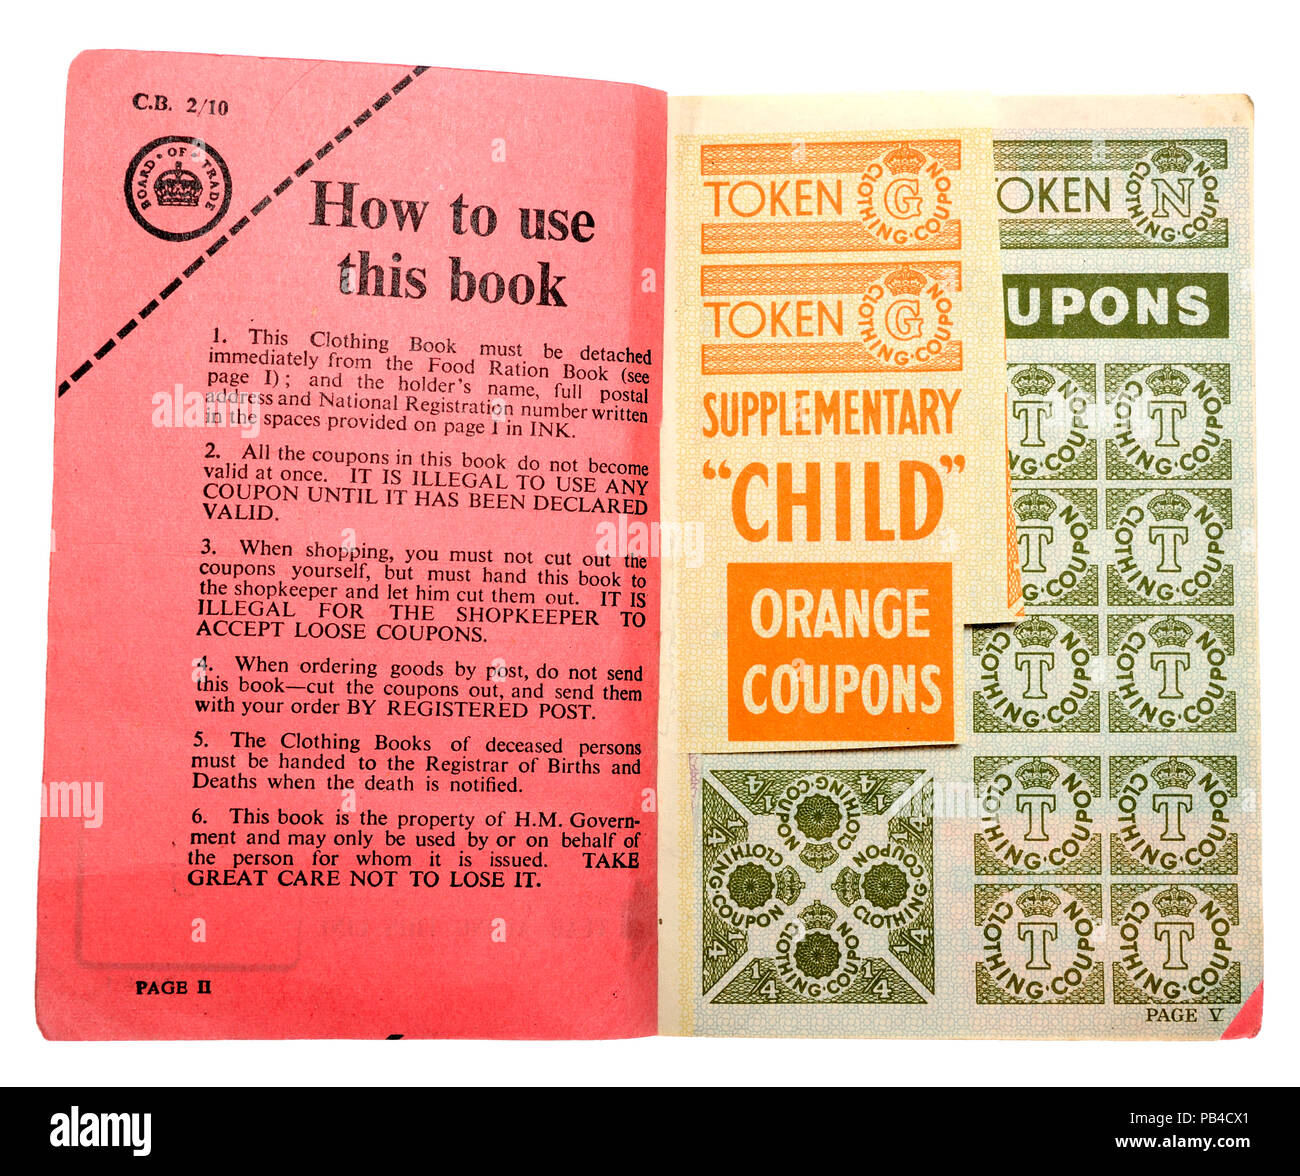 Clothing Ration book in use after World War Two to cope with post war shortages Stock Photo